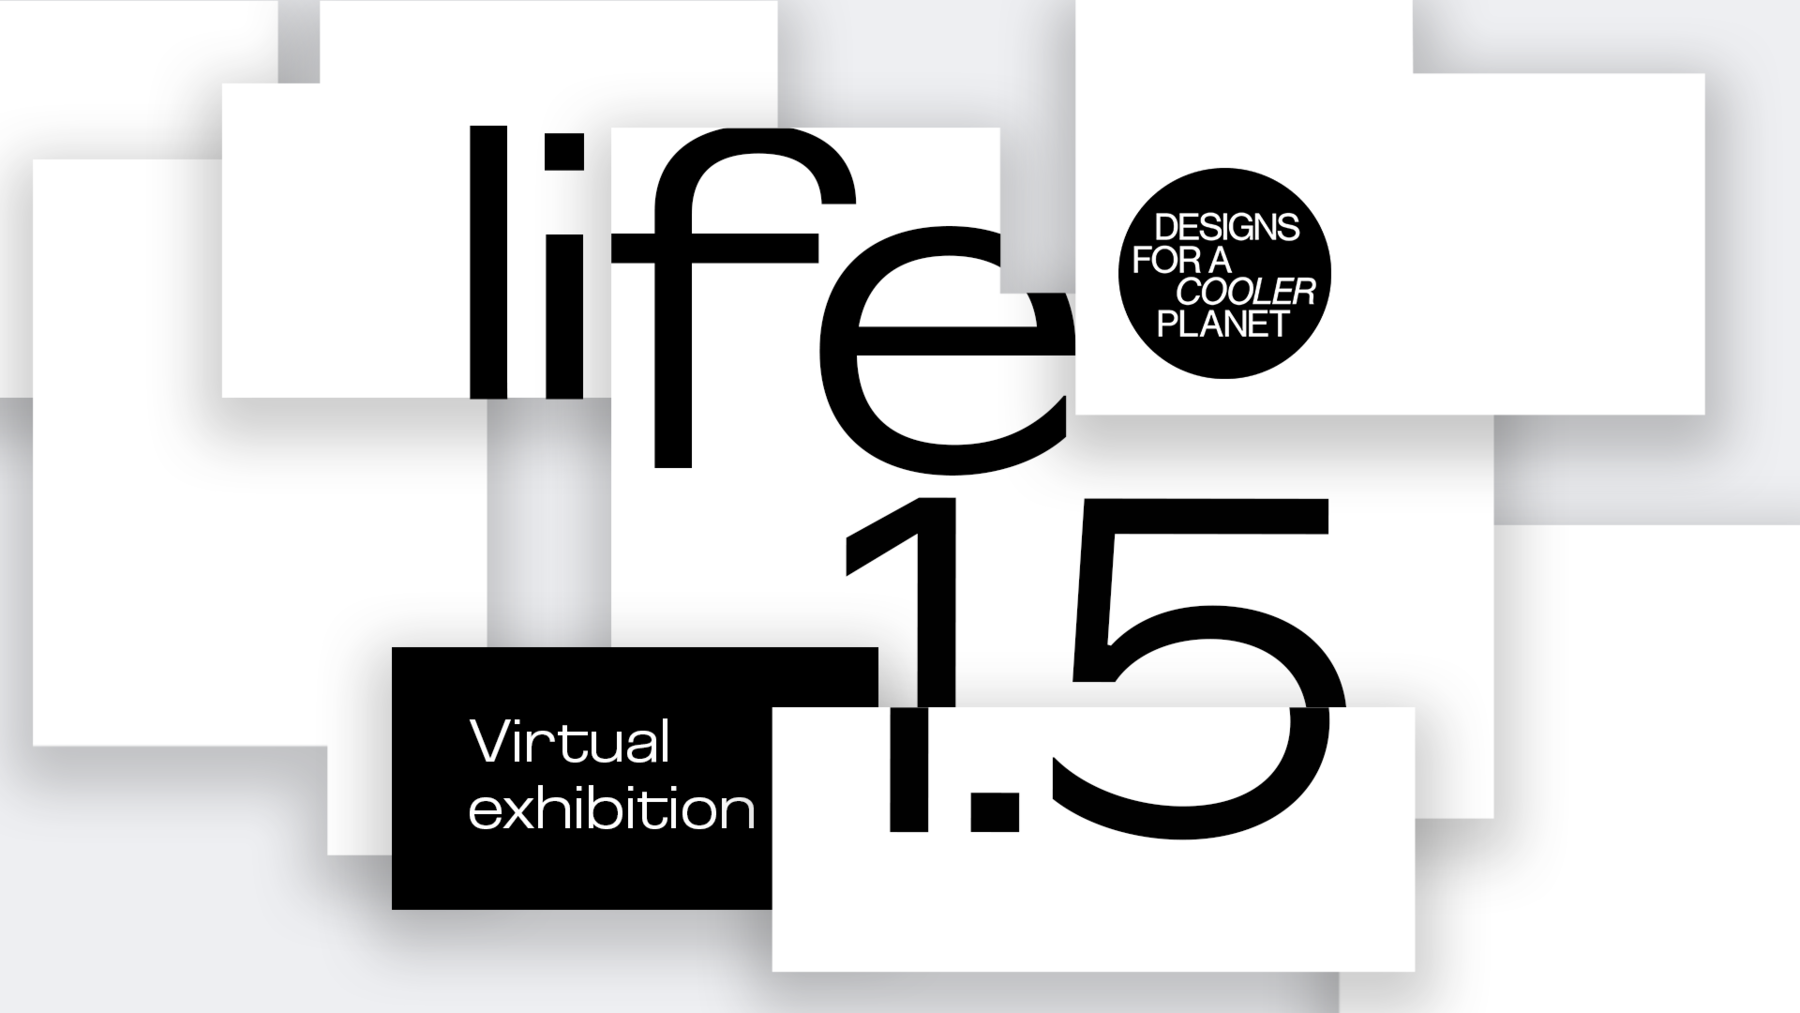 Life 1.5 virtual exhibition - text on white, fragmented background, with Designs for a Cooler Planet logo.